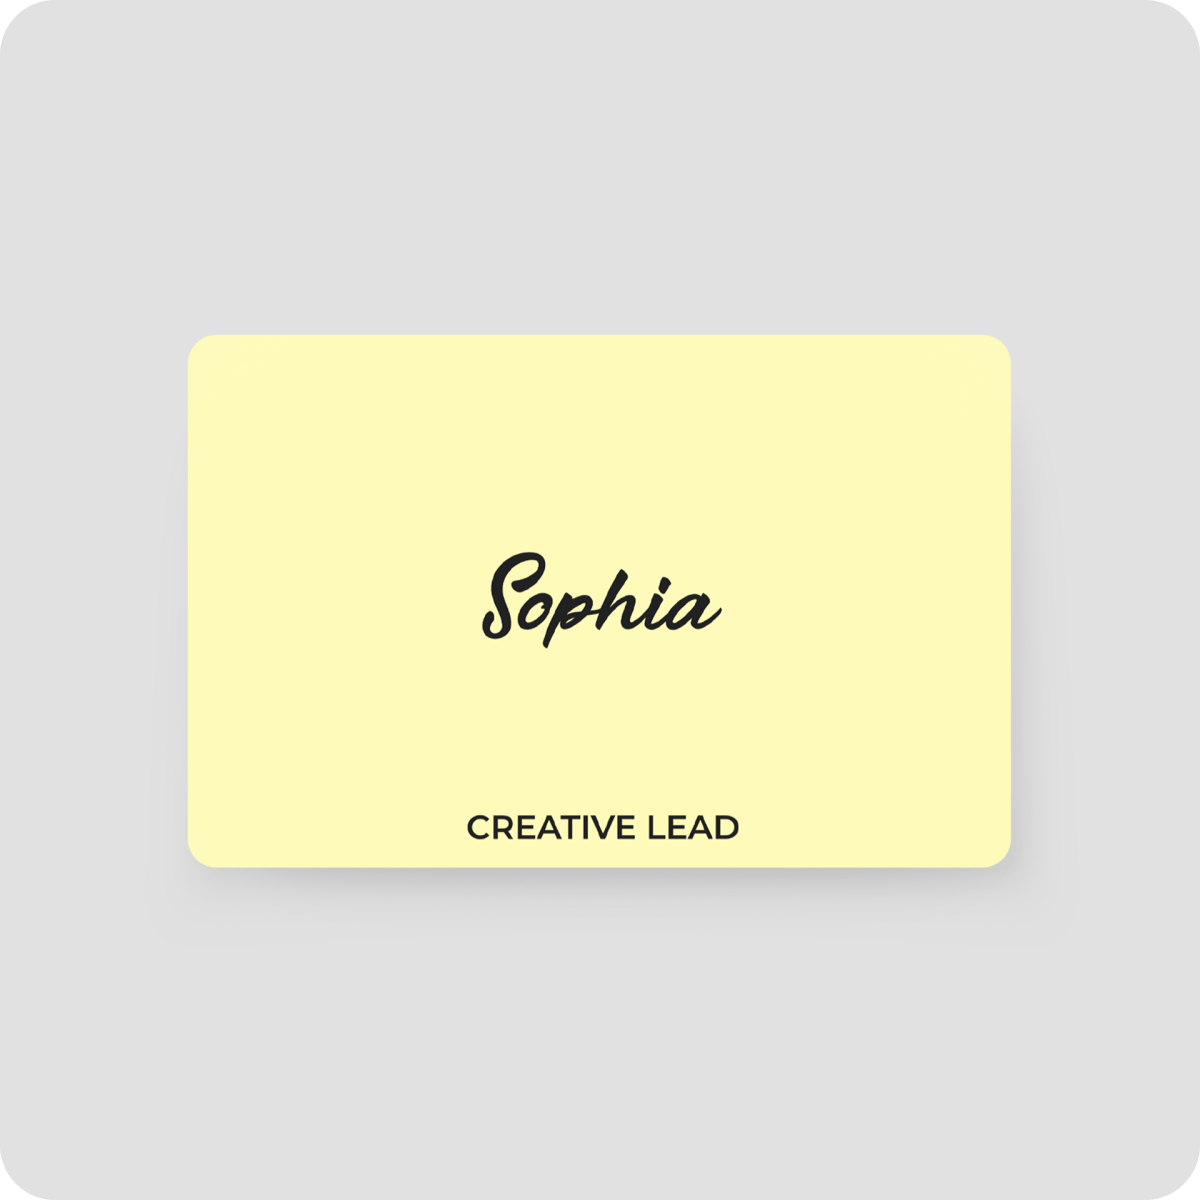 One Good Card: Smart Digital Name Card (Marker) - Personalised Near Field Communication (NFC) Digital Business Cards designs - Daisy Yellow